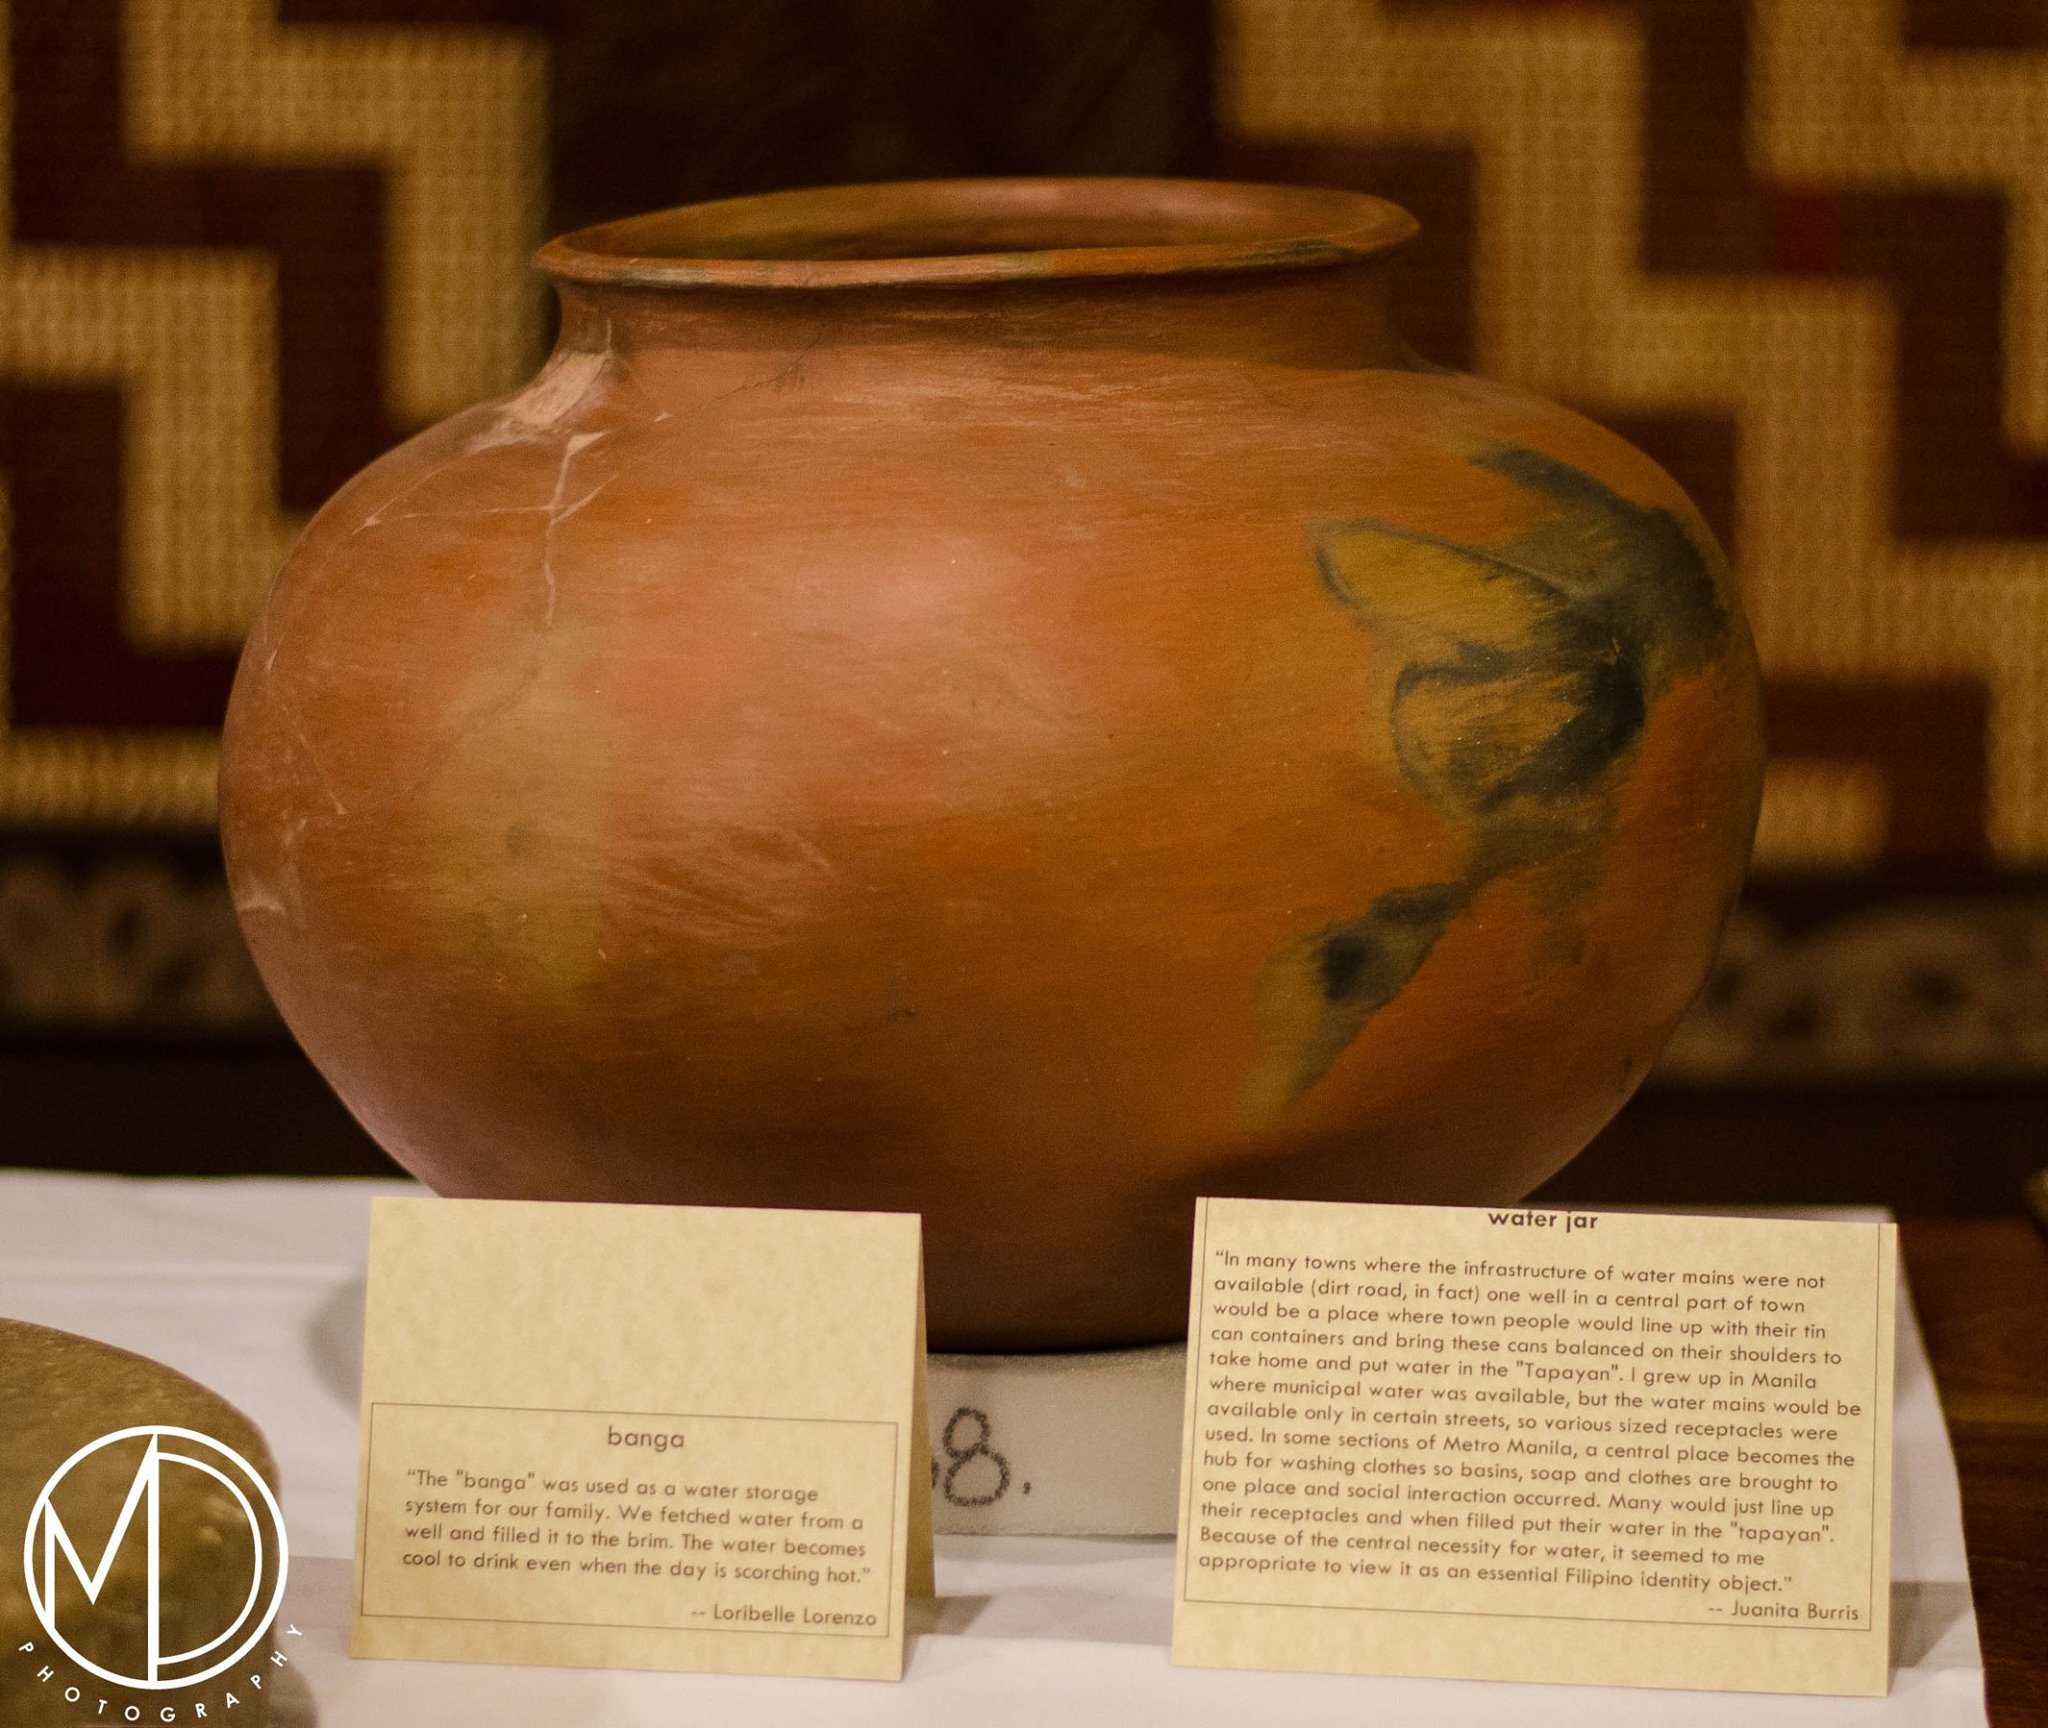 Close up image of a water jar on the artifact display tables. (c) Field Museum of Natural History - CC BY-NC 4.0